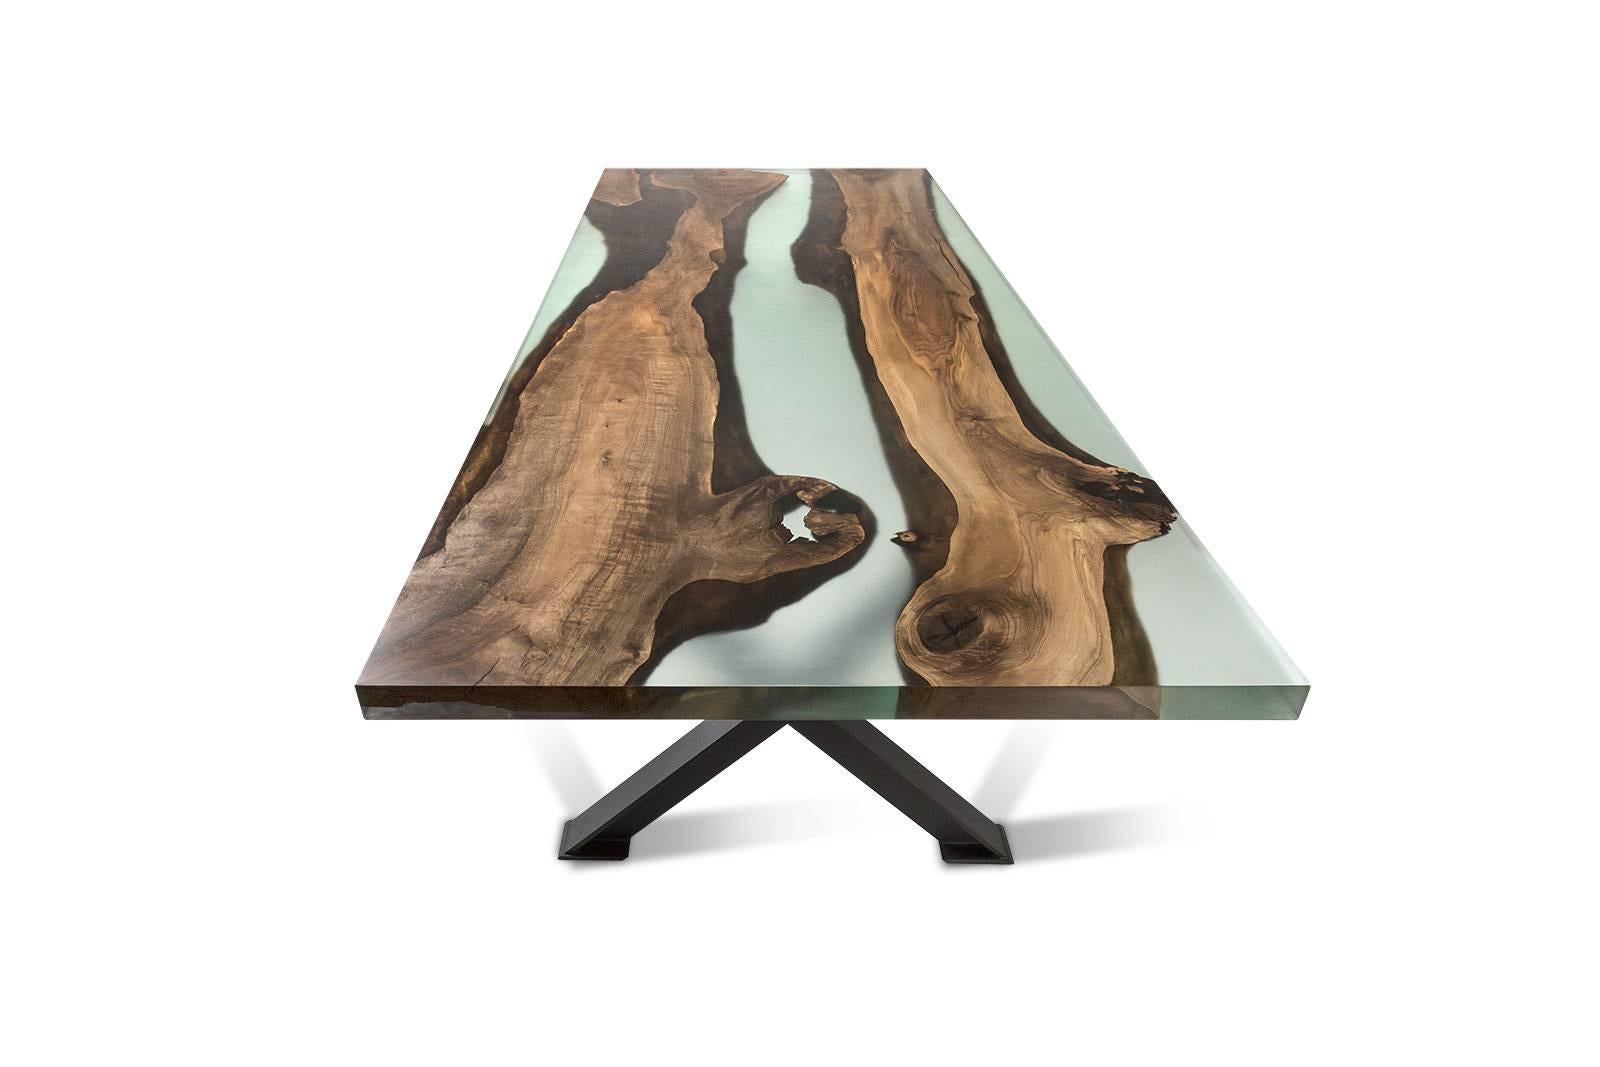 The ‘Hudson 250 Epoxy Resin Dining Table’ was made in Ankara, Turkey with walnut wood. The wood is kilned and dried prior to being filled with high quality resin and has cast iron geometric legs. Its edges are straight cut to show the depth of the